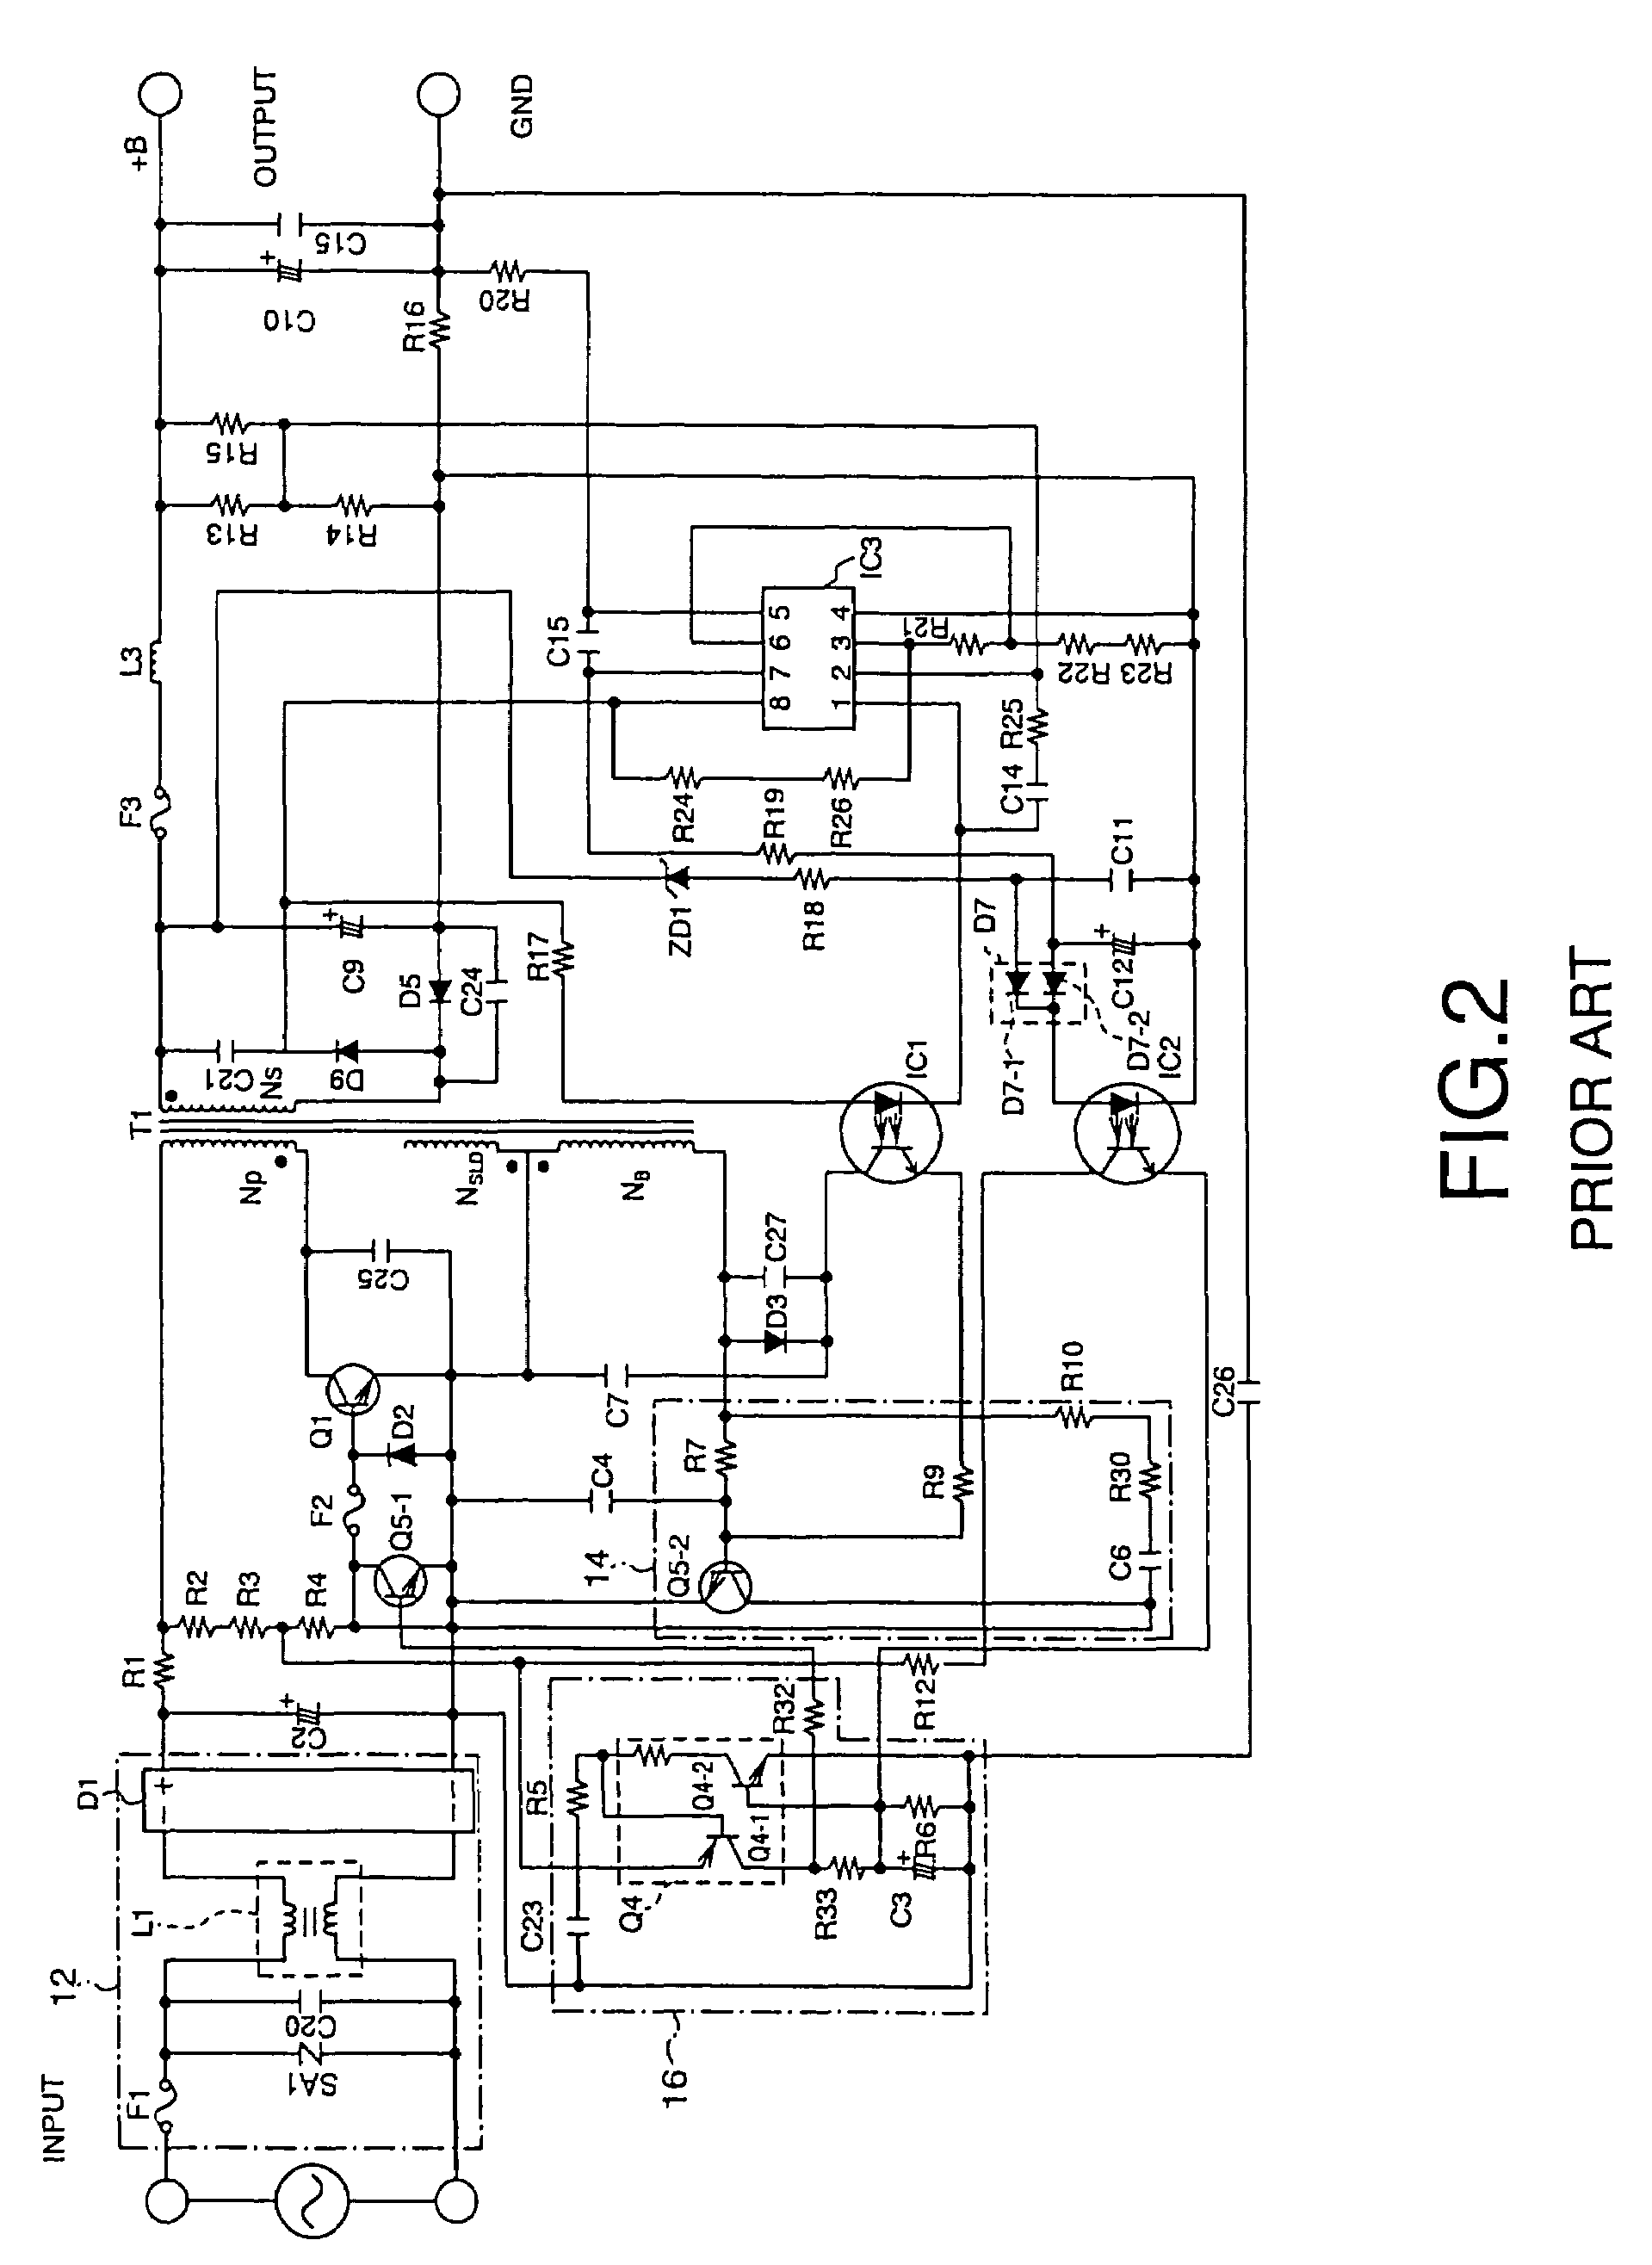 Switching type AC adapter circuit with a latch protection circuit